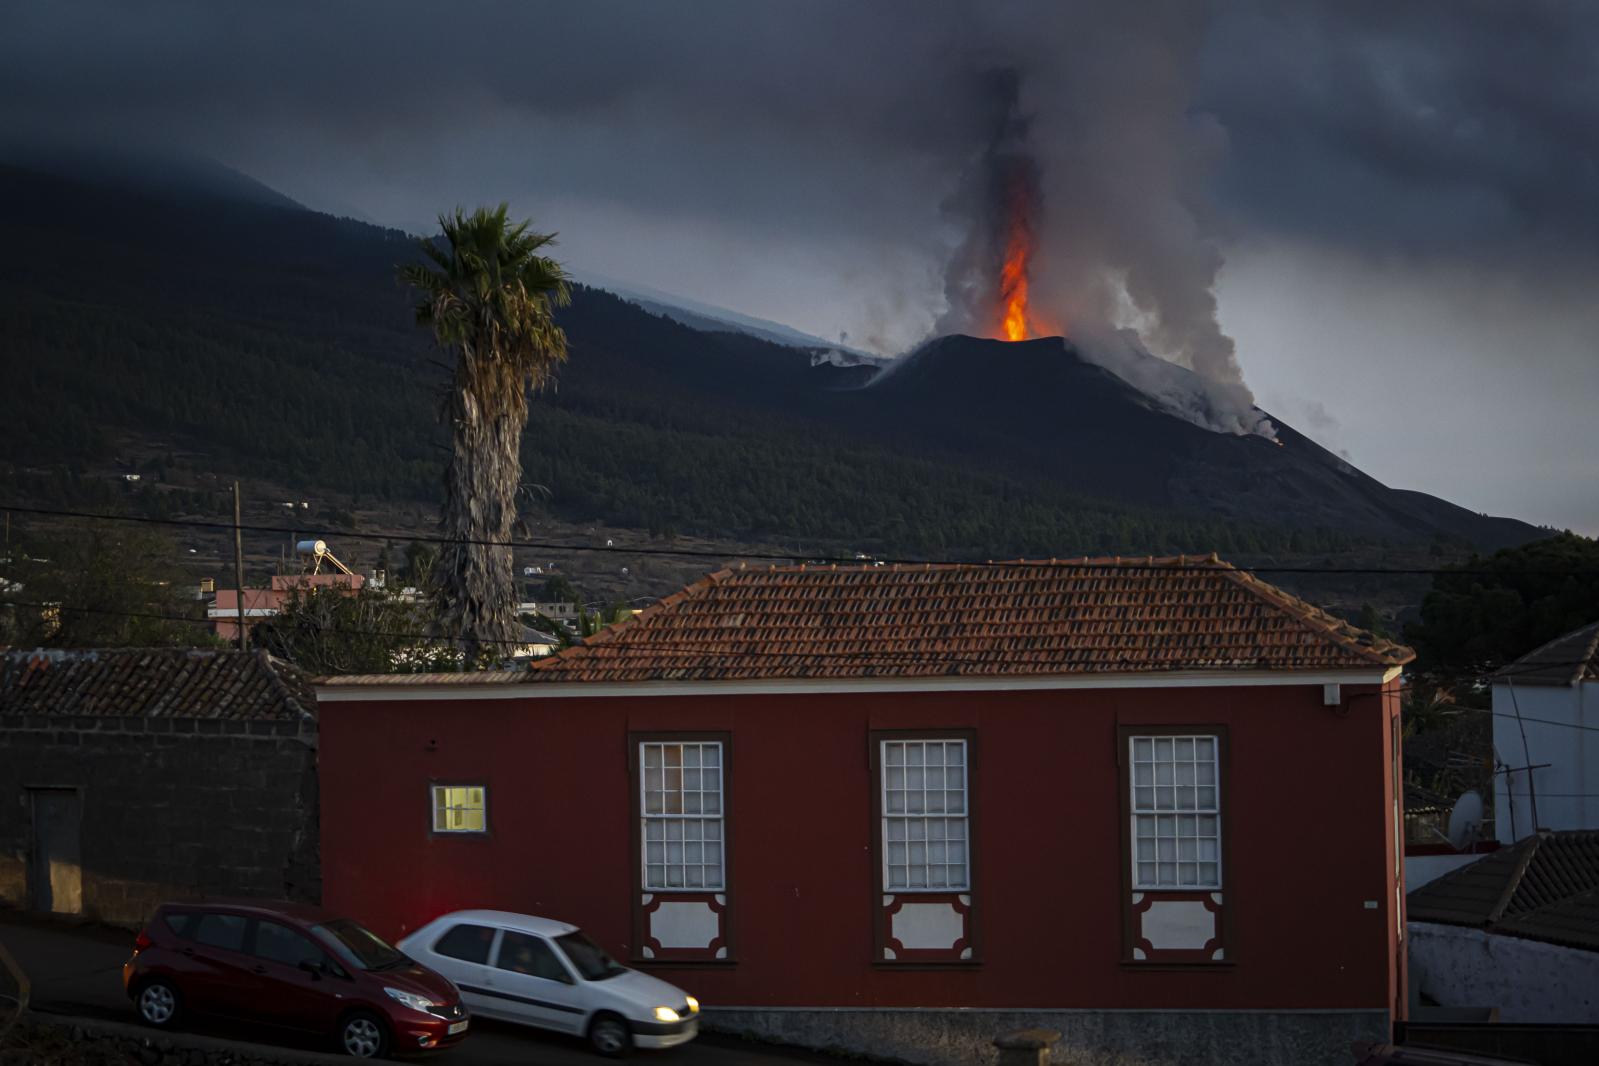 Image from Daily News - View of Cumbre Vieja volcano eruption from El Paso, La...